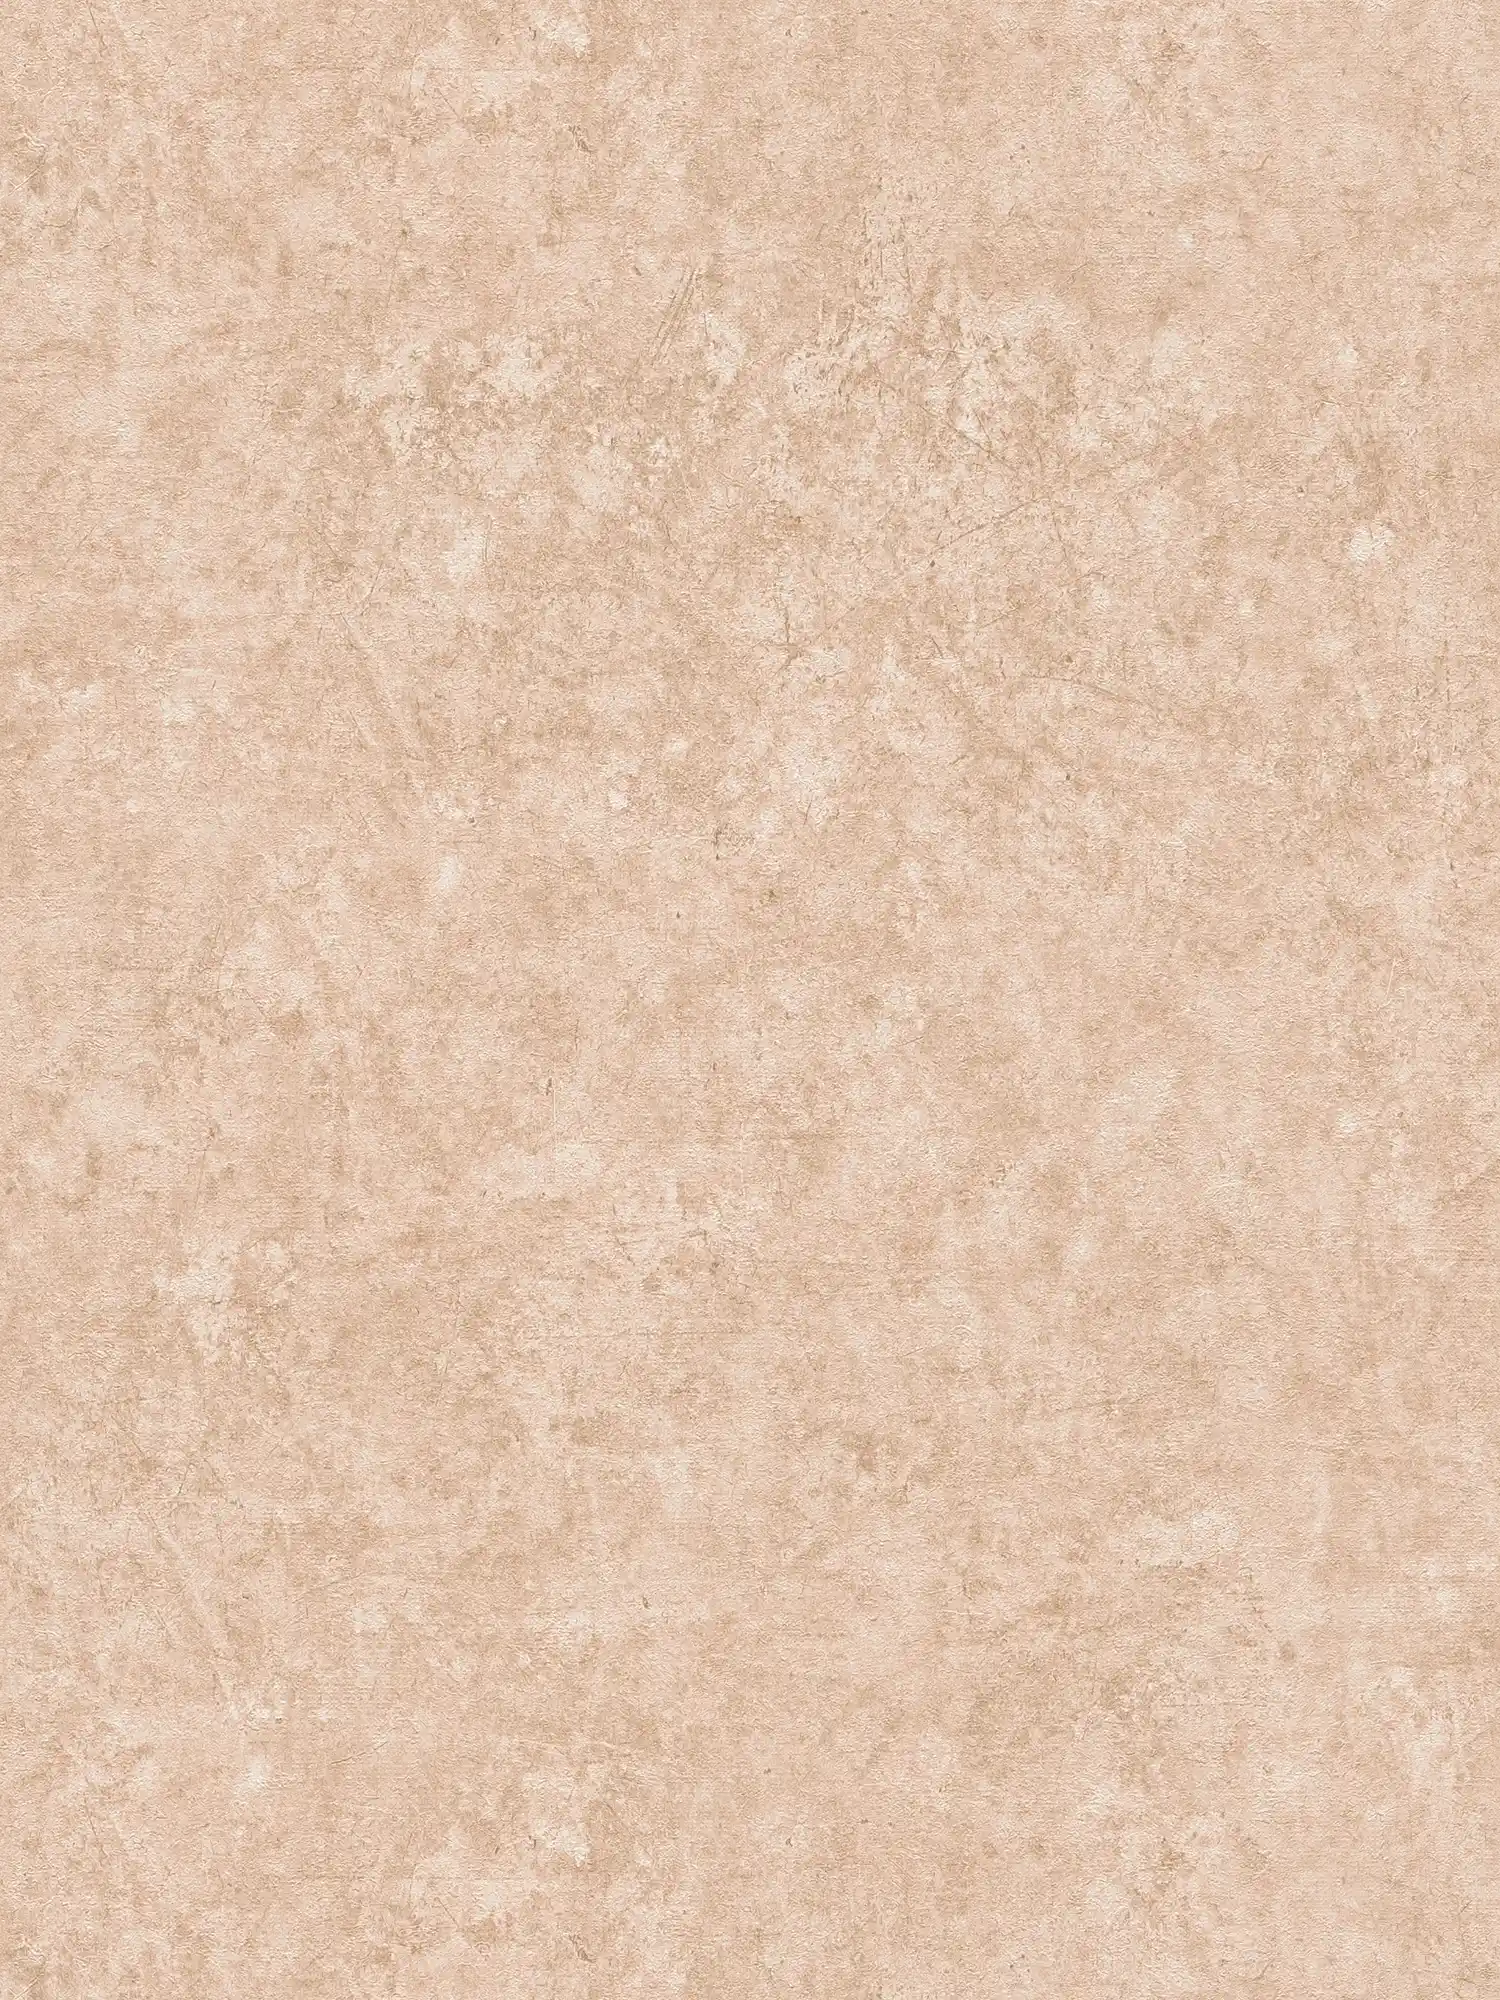 Non-woven wallpaper plain with textured pattern - light brown, beige
